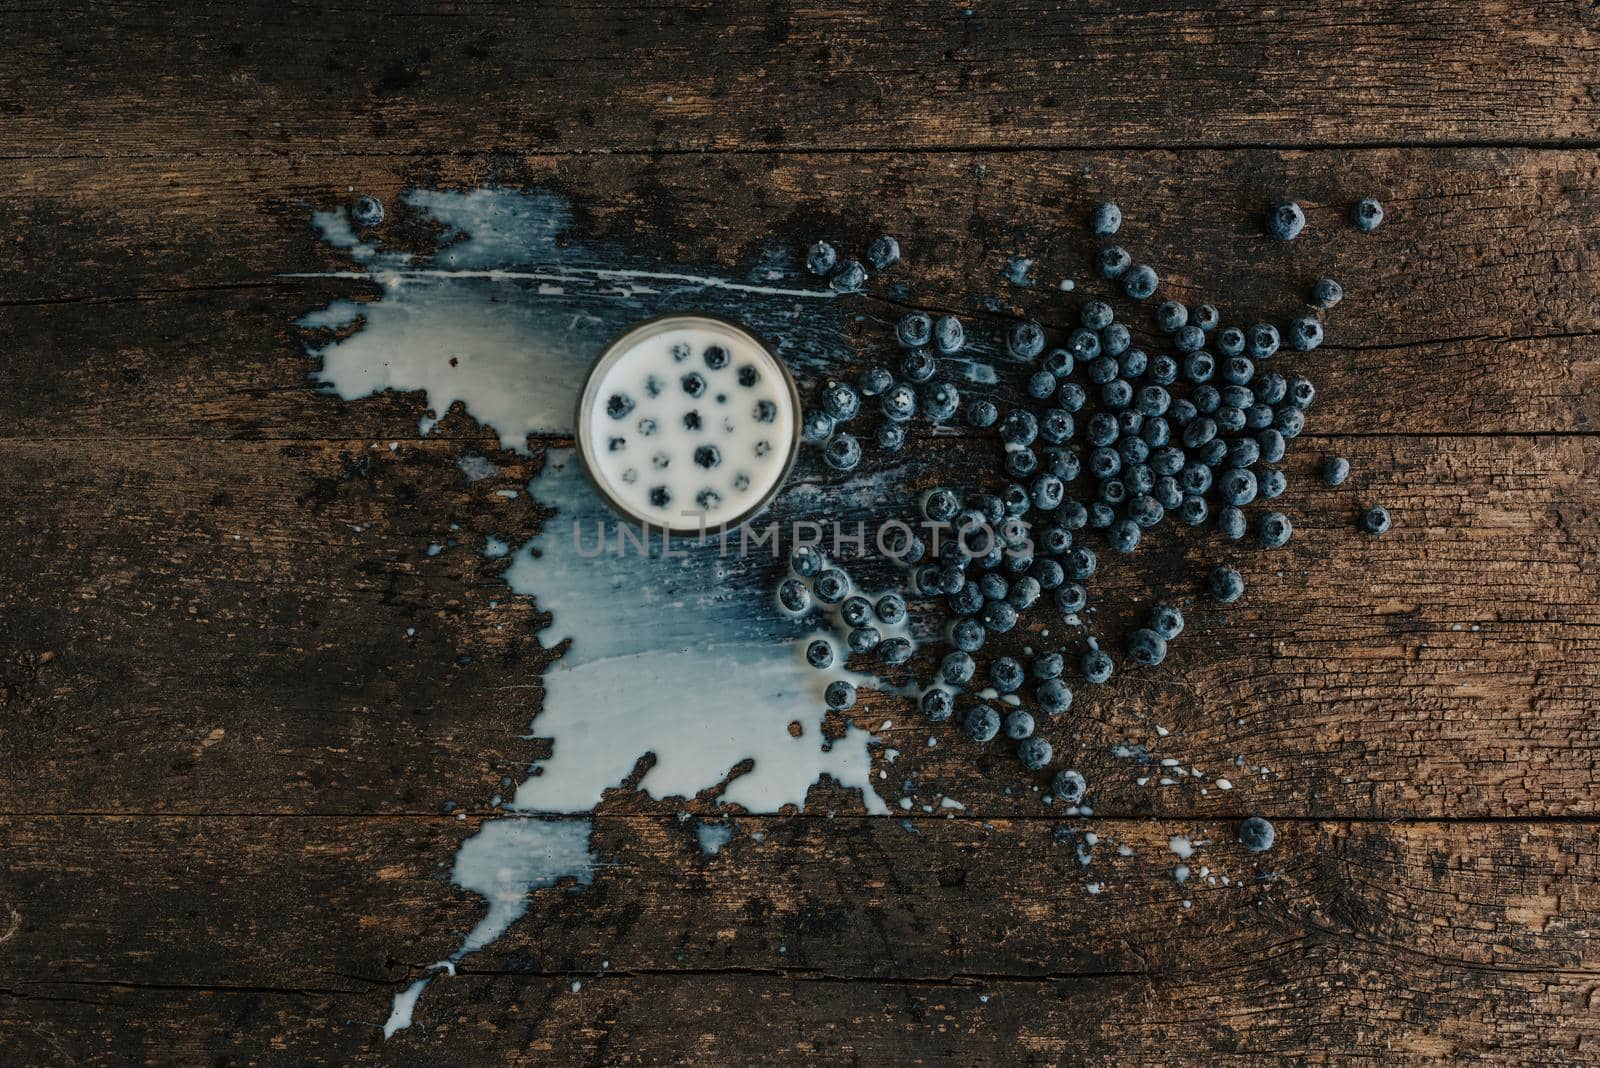 Berries are thrown into the transparent glass making splashes of milk. Blue fresh blueberries are scattered on an old brown wooden cracked table. White water pour down on the table.